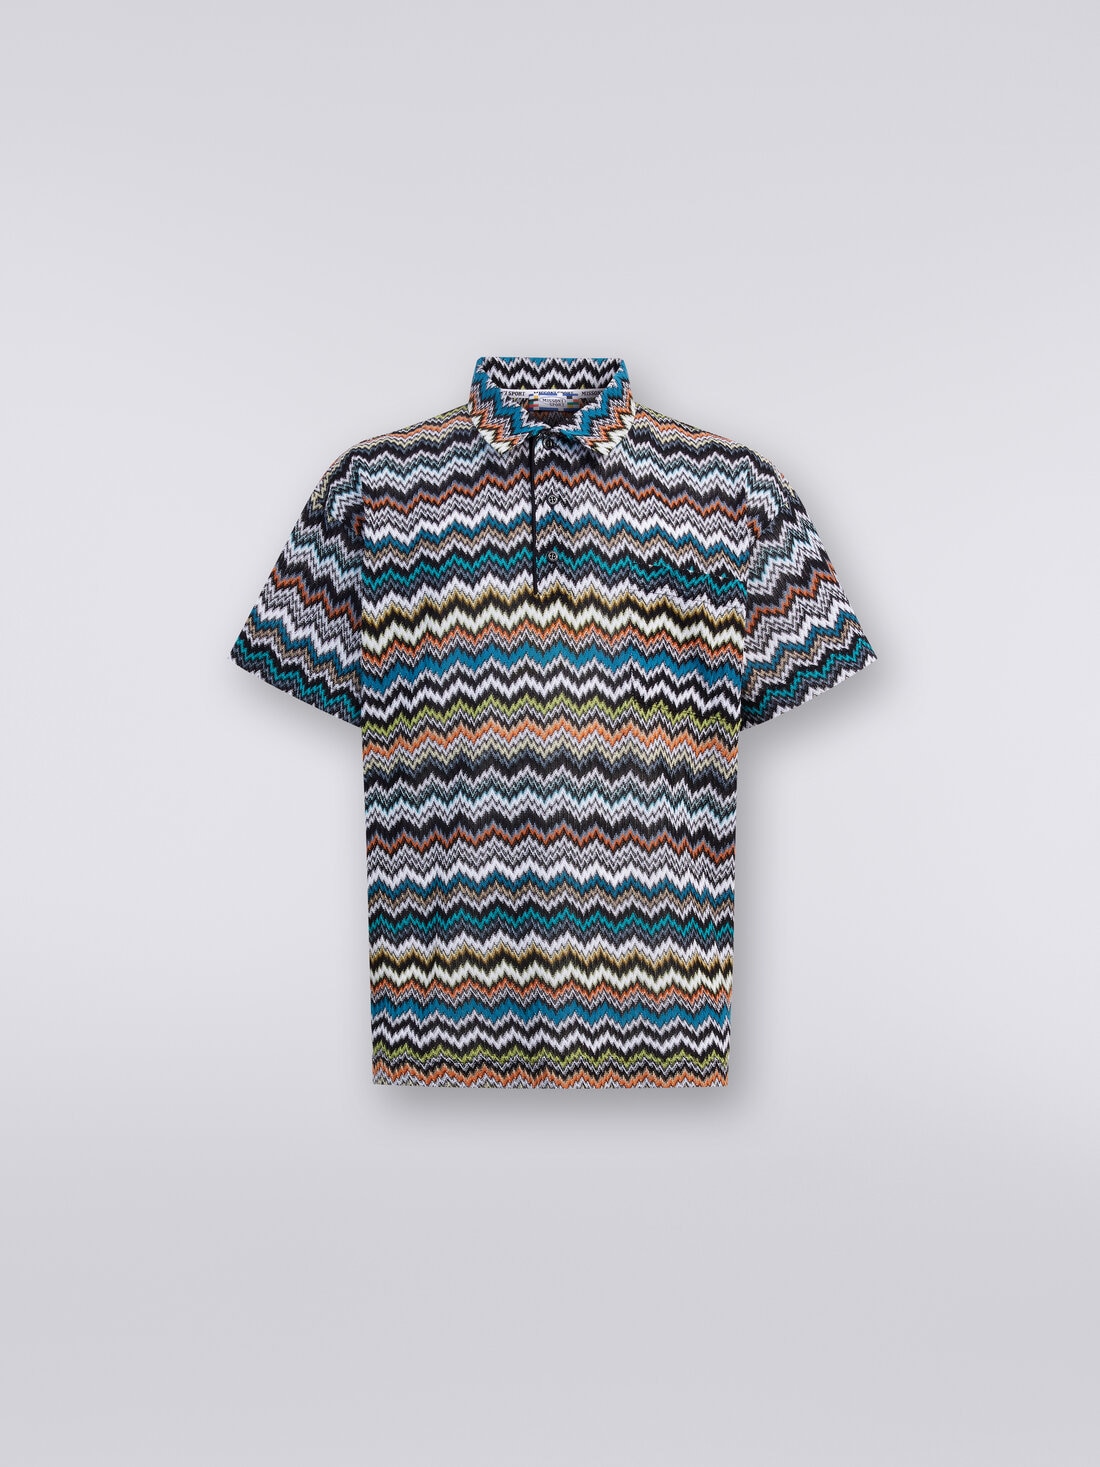 Polo shirt in zigzag cotton and viscose knit, Multicoloured  - TS24S201BR00UUSM9AX - 0